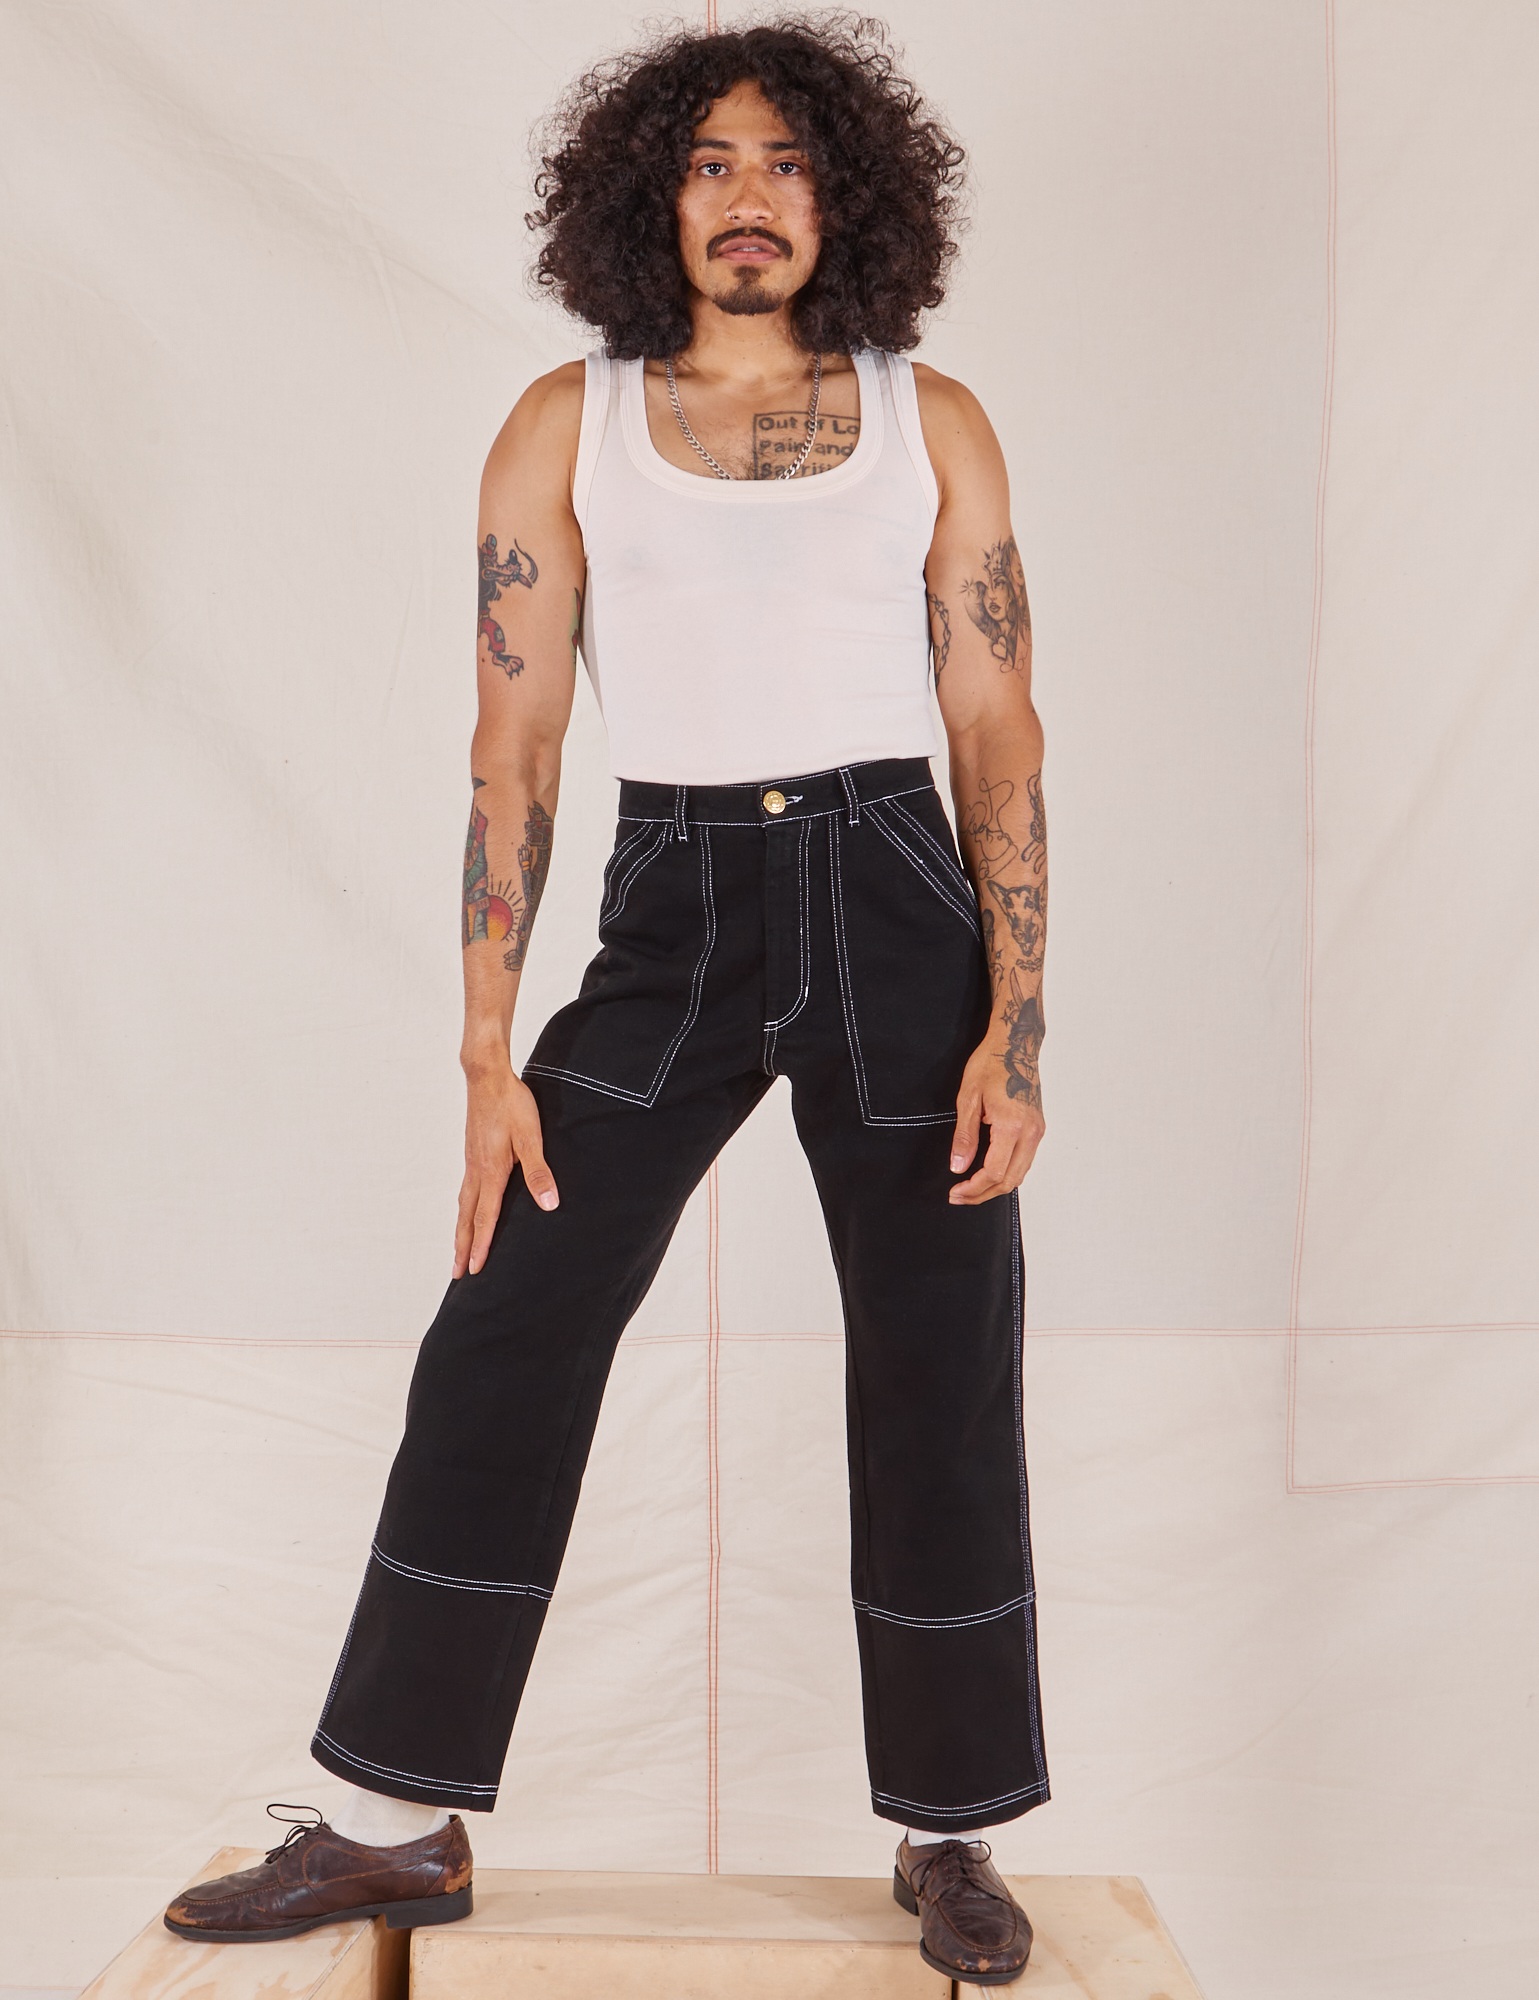 Jesse is 5&#39;8&quot; and wearing XS Carpenter Jeans in Black paired with our vintage off-white Tank Top